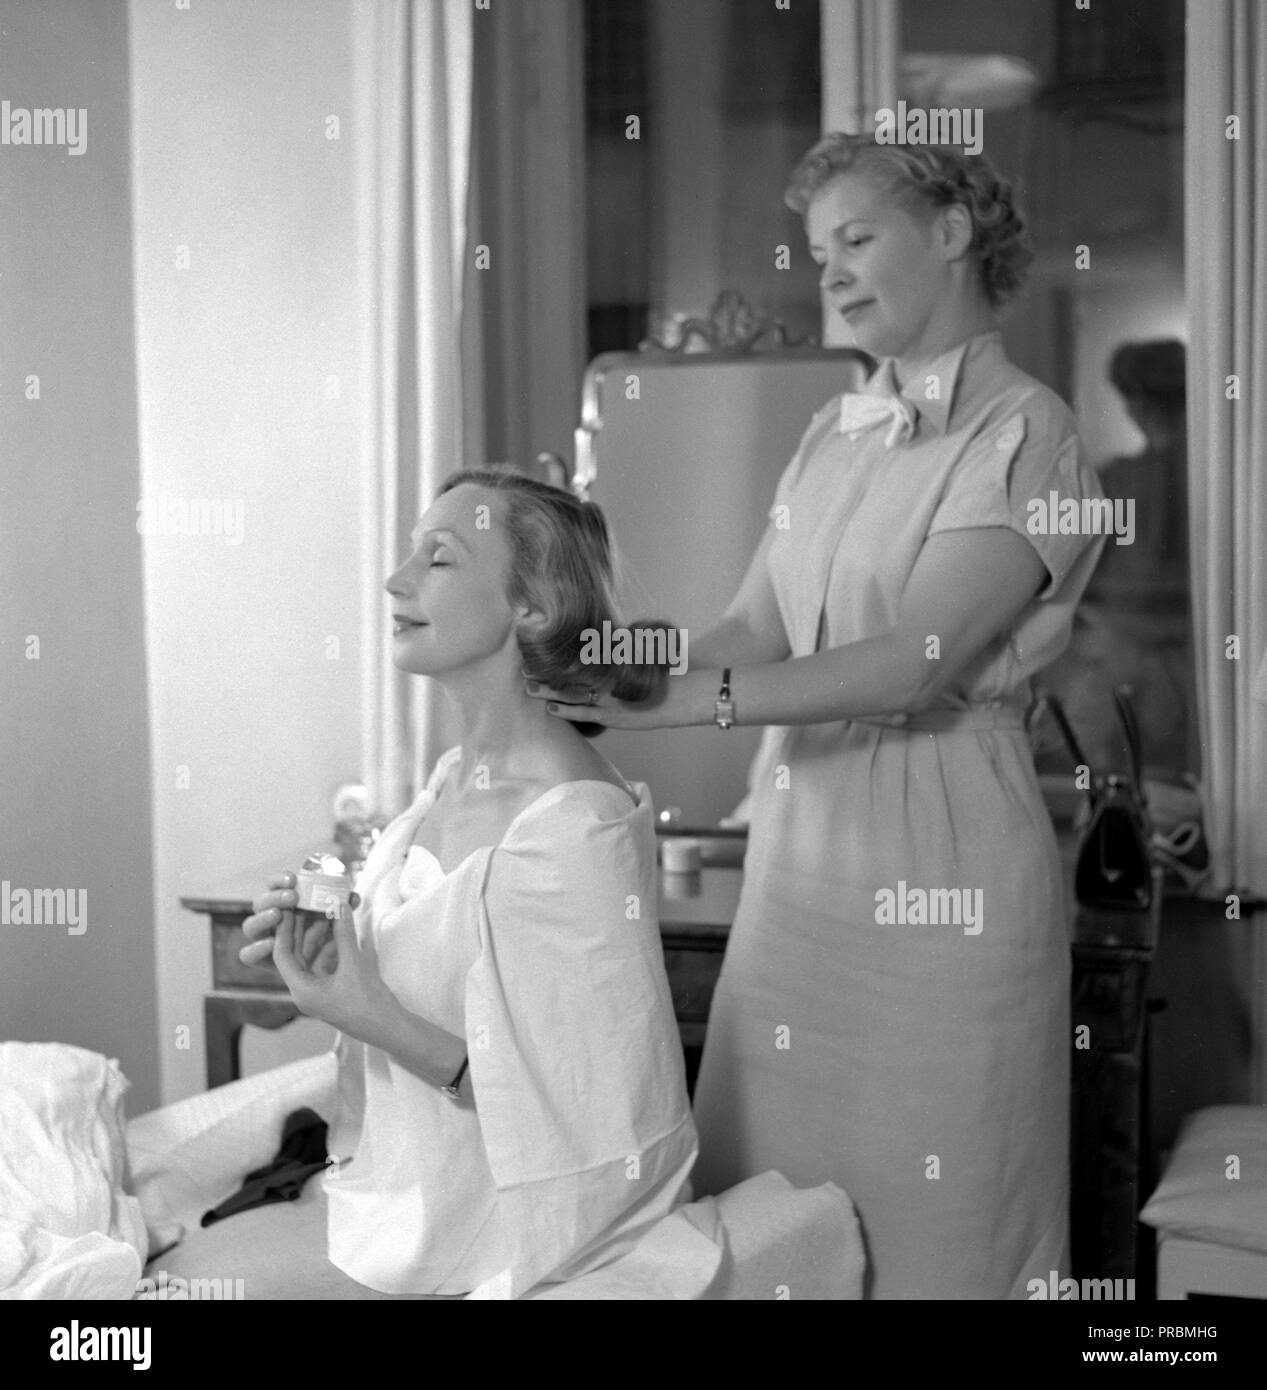 Inga Tidblad. (1901-1975) Swedish actress, pictured here when getting a massage 1952. Ref 2169 Stock Photo